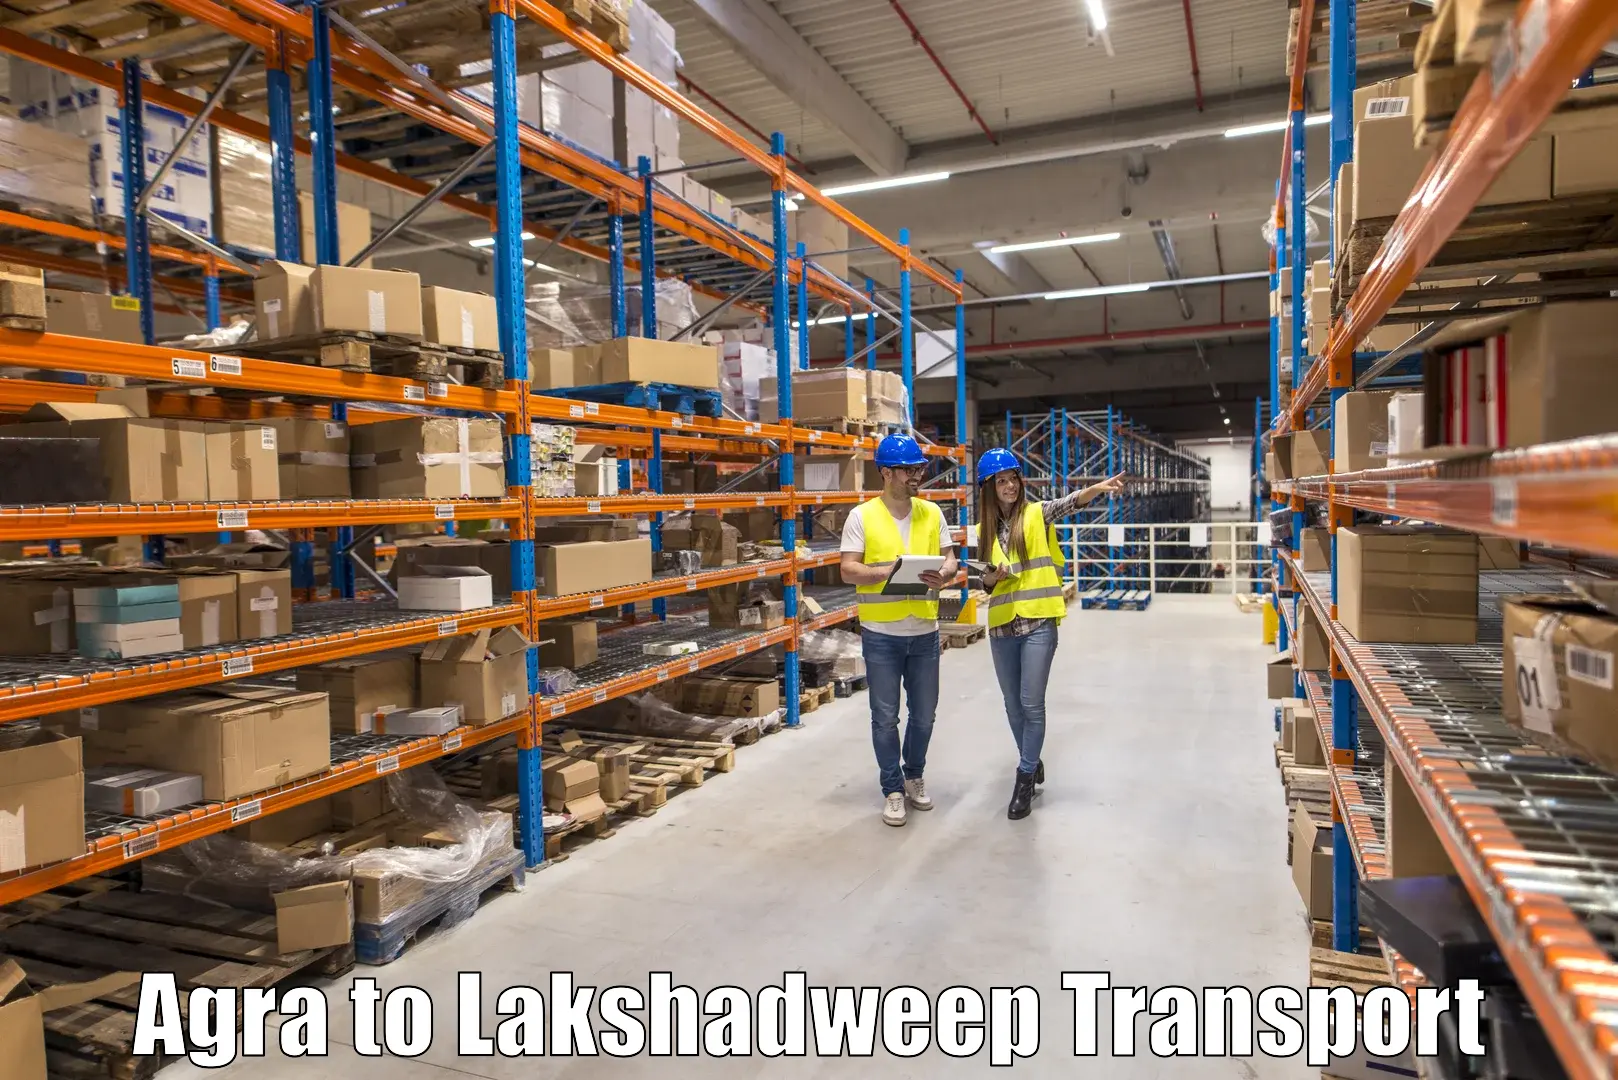 Lorry transport service Agra to Lakshadweep